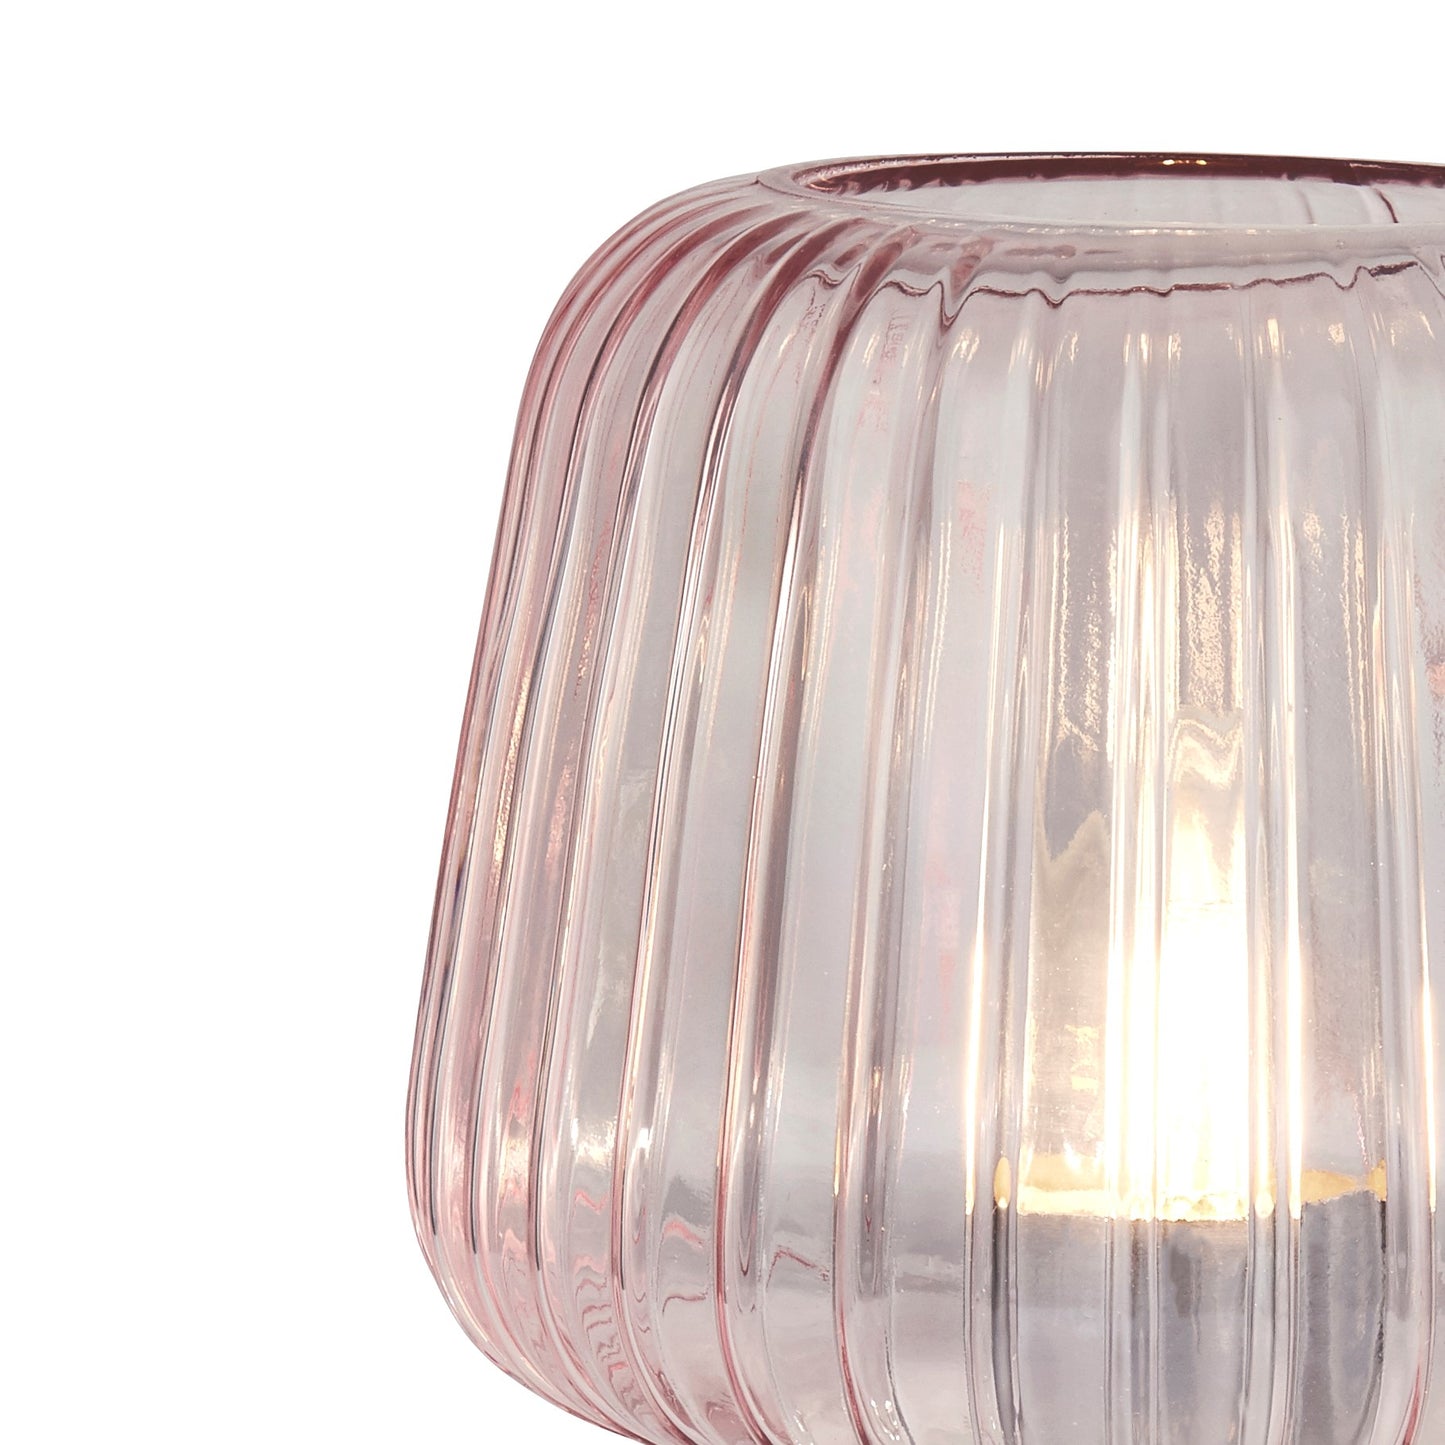 Our Rosie table lamp is made from a beautiful shade of pink rose glass will really catch the eye as the light cascades through the ribbed glass detailing of this table lamp. This light is perfect for bedrooms, girls decor, side tables, coffee tables and dressing tables to add elegance and a touch of class. 